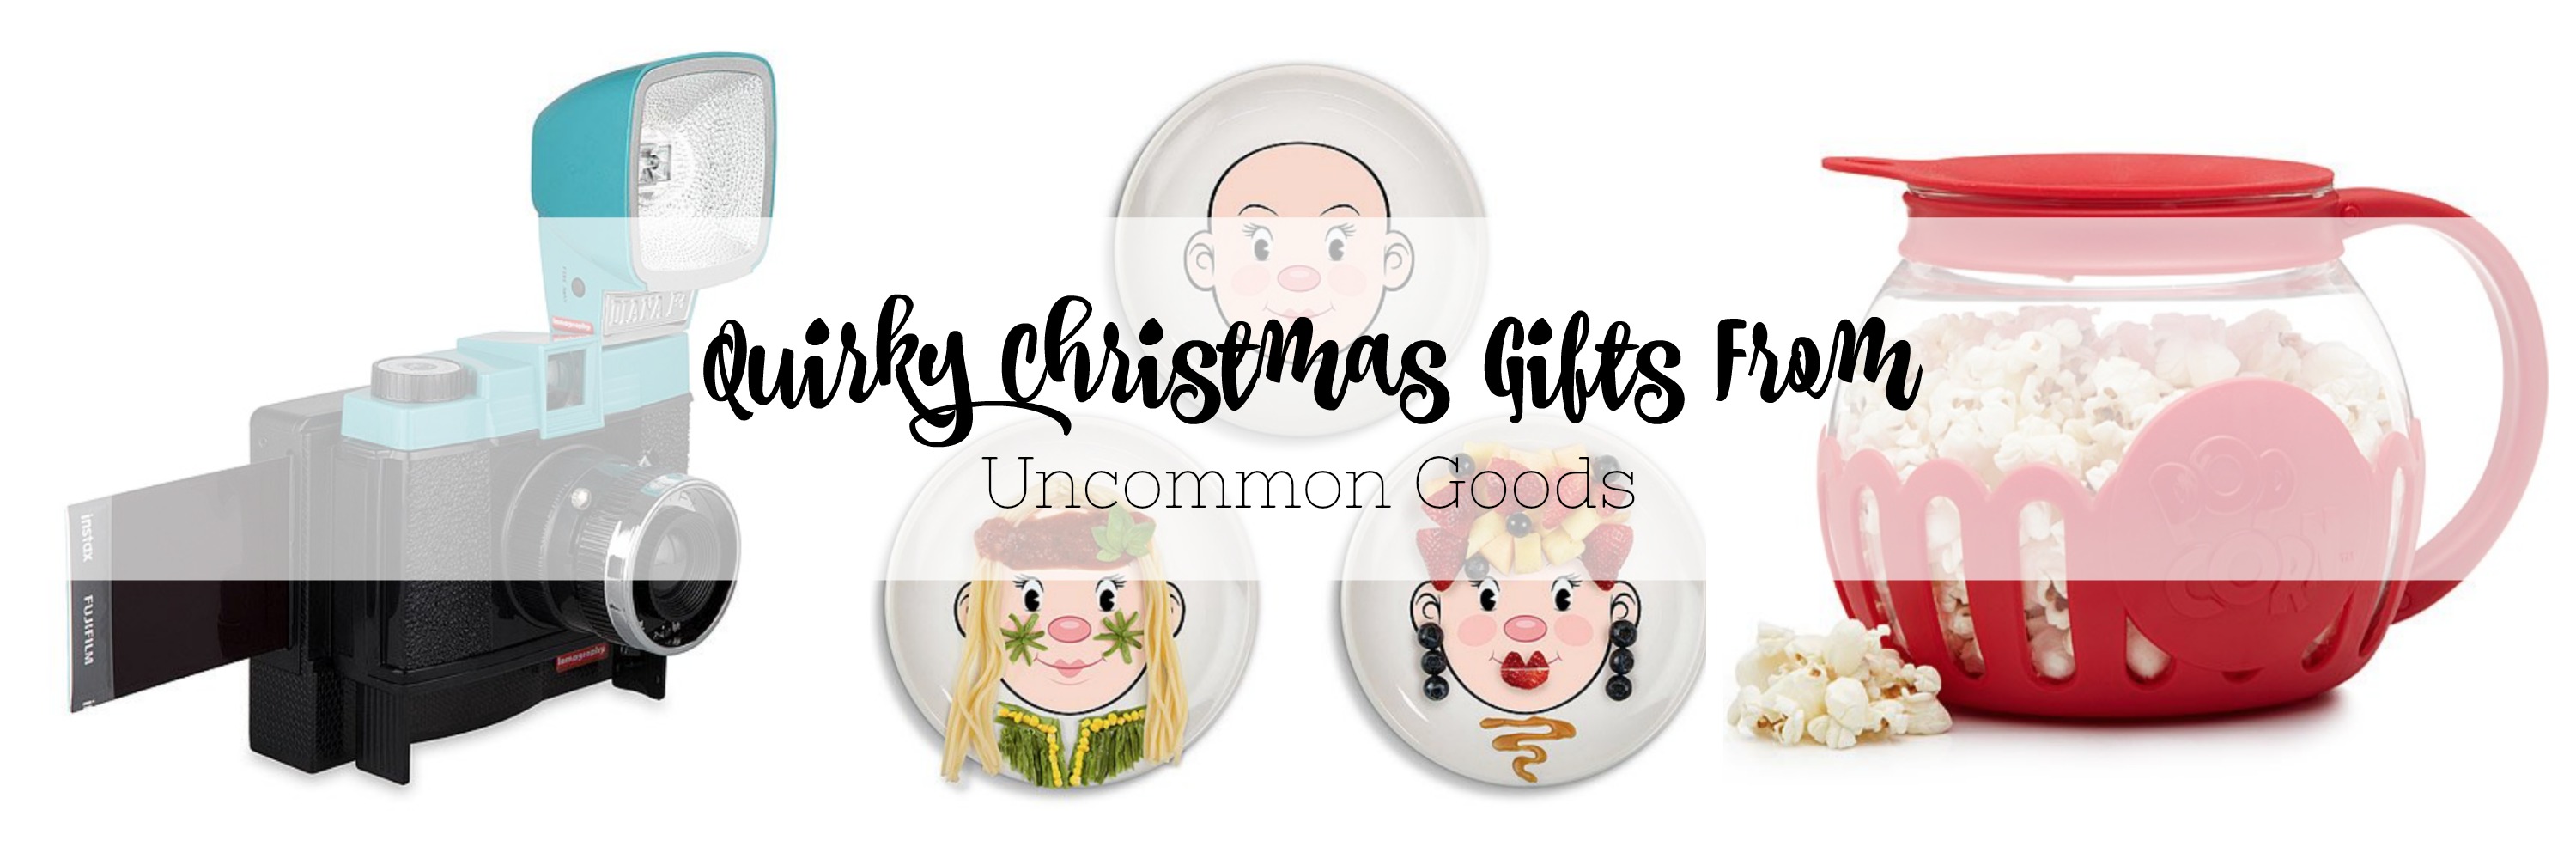 Quirky Christmas Gifts From Uncommon Goods